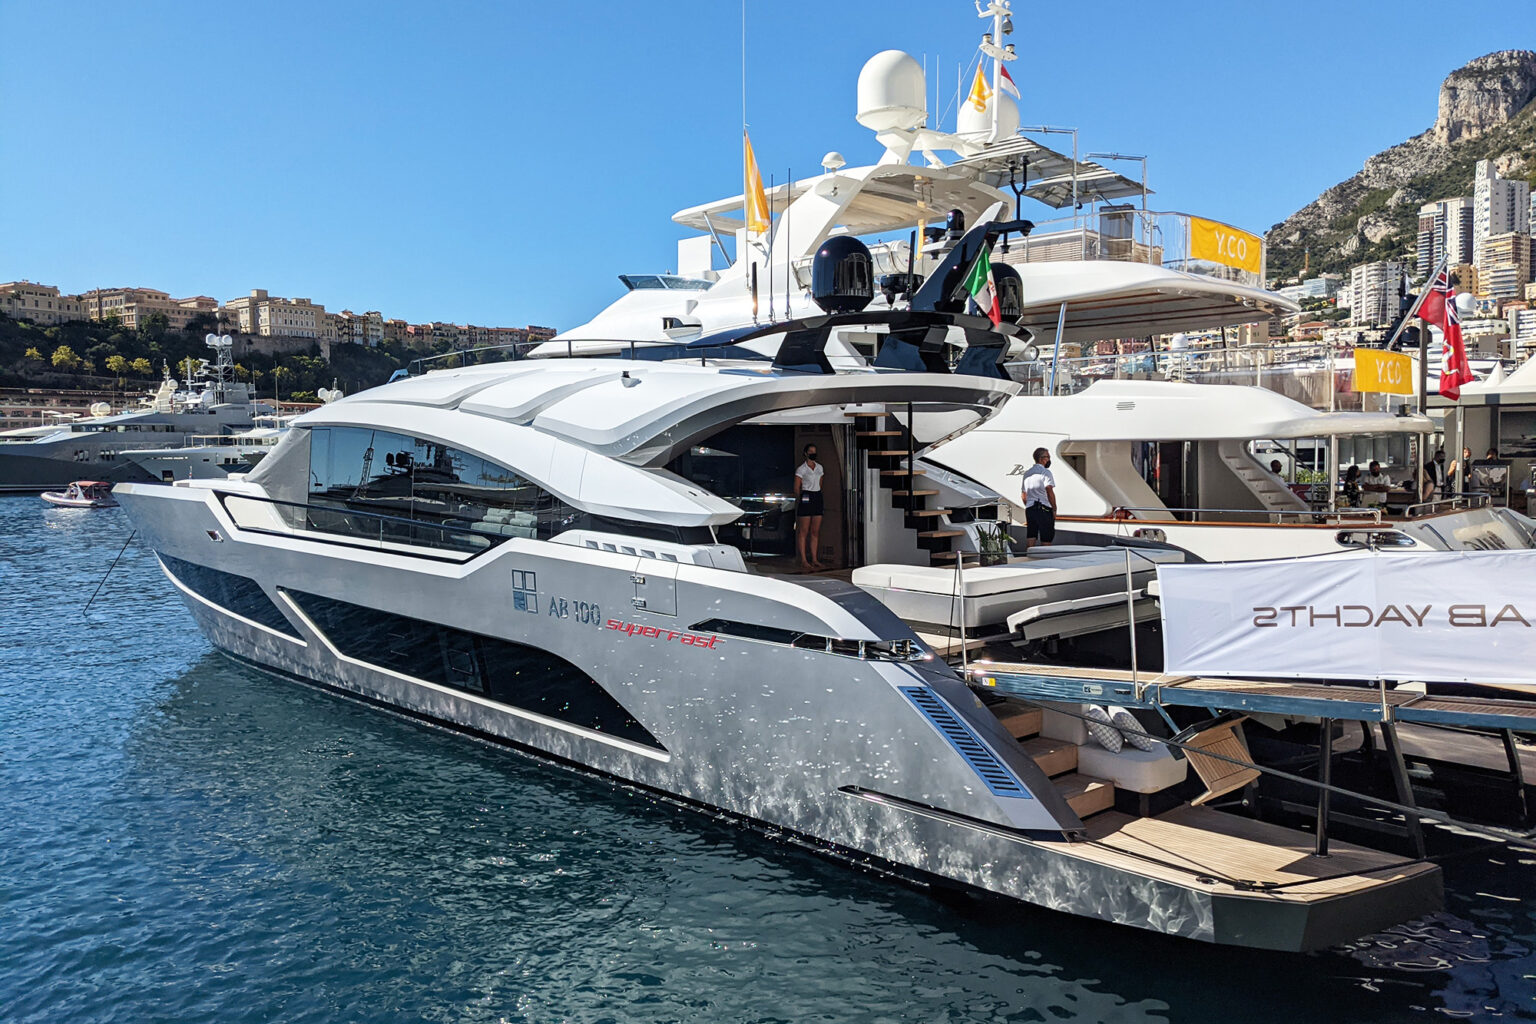 AB 100 Superfast for Sale - Used AB 100 Superfast Price - TWW Yacht